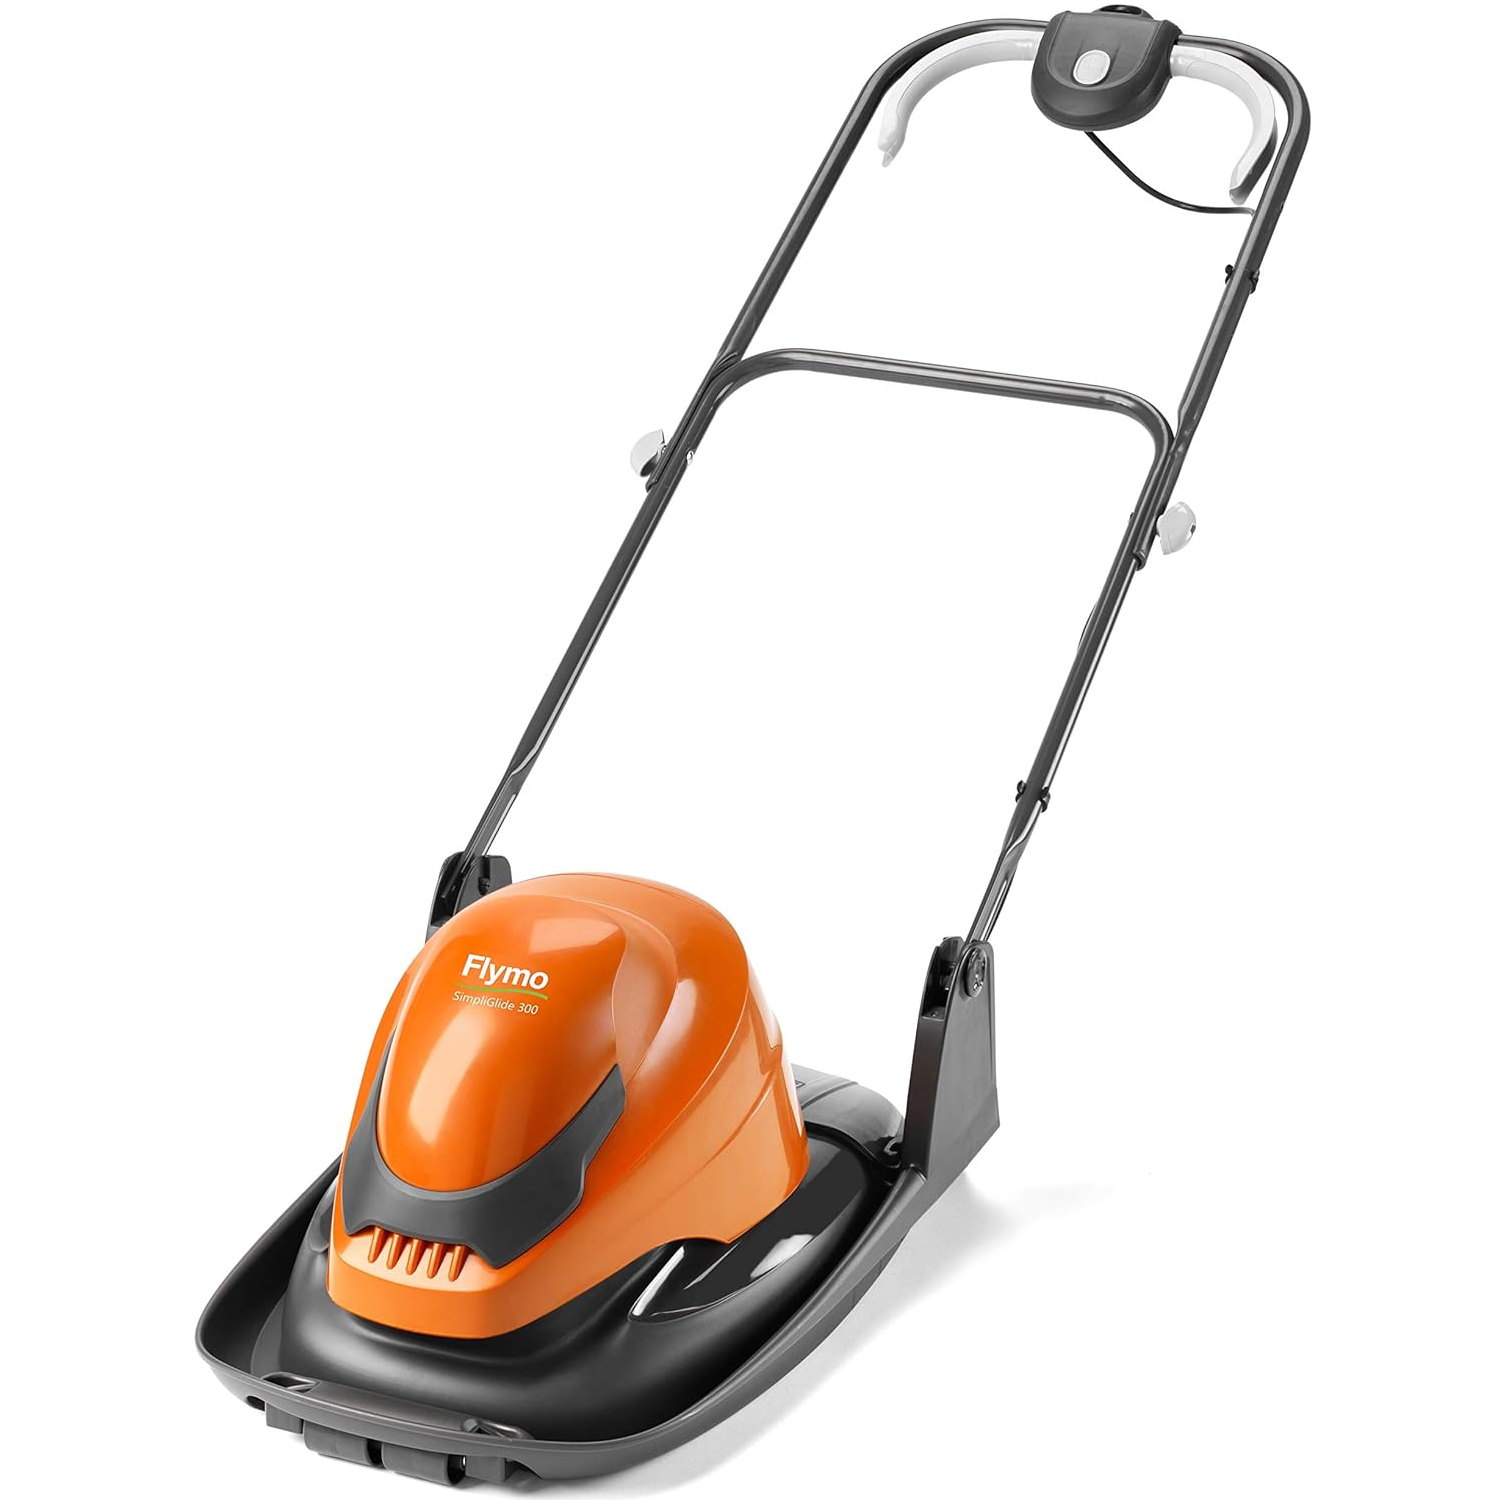 Flymo simpliglide 300 1700w hover lawnmower